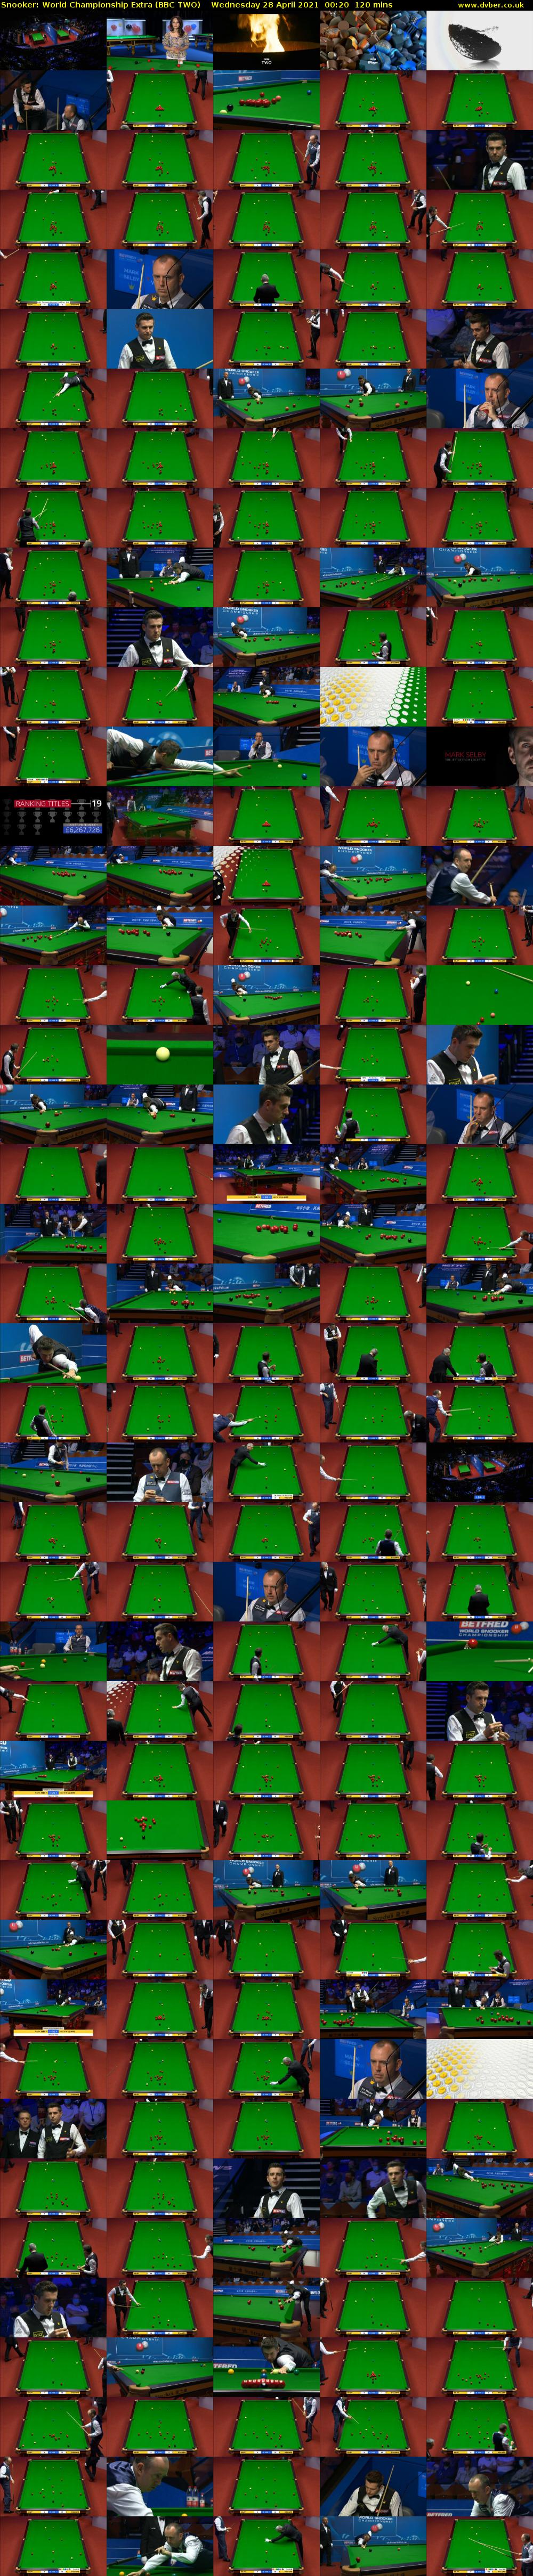 Snooker: World Championship Extra (BBC TWO) Wednesday 28 April 2021 00:20 - 02:20